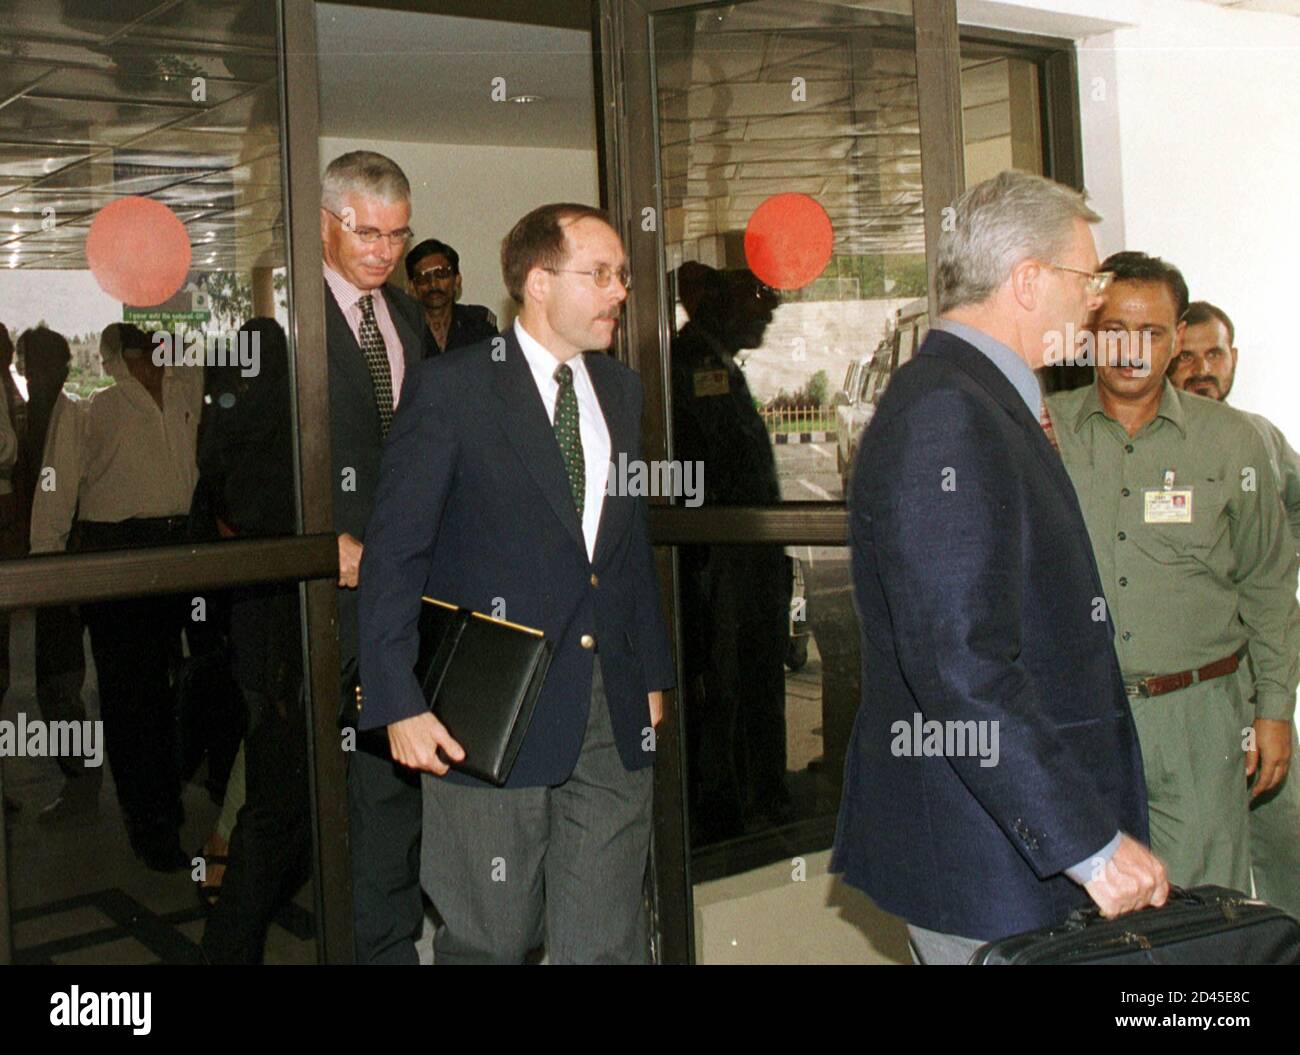 Australian consul Alistair Adams (R), U.S. Consul General David Donahue (C) and German diplomat Helmut Landes (extreme left) leave the VIP lounge at Islamabad airport after arriving from Kabul, August 21, 2001. The diplomats returned from Afghanistan following a futile week-long effort to visit their eight citizens detained on charges of promoting Christianity.  AH/RCS Stock Photo